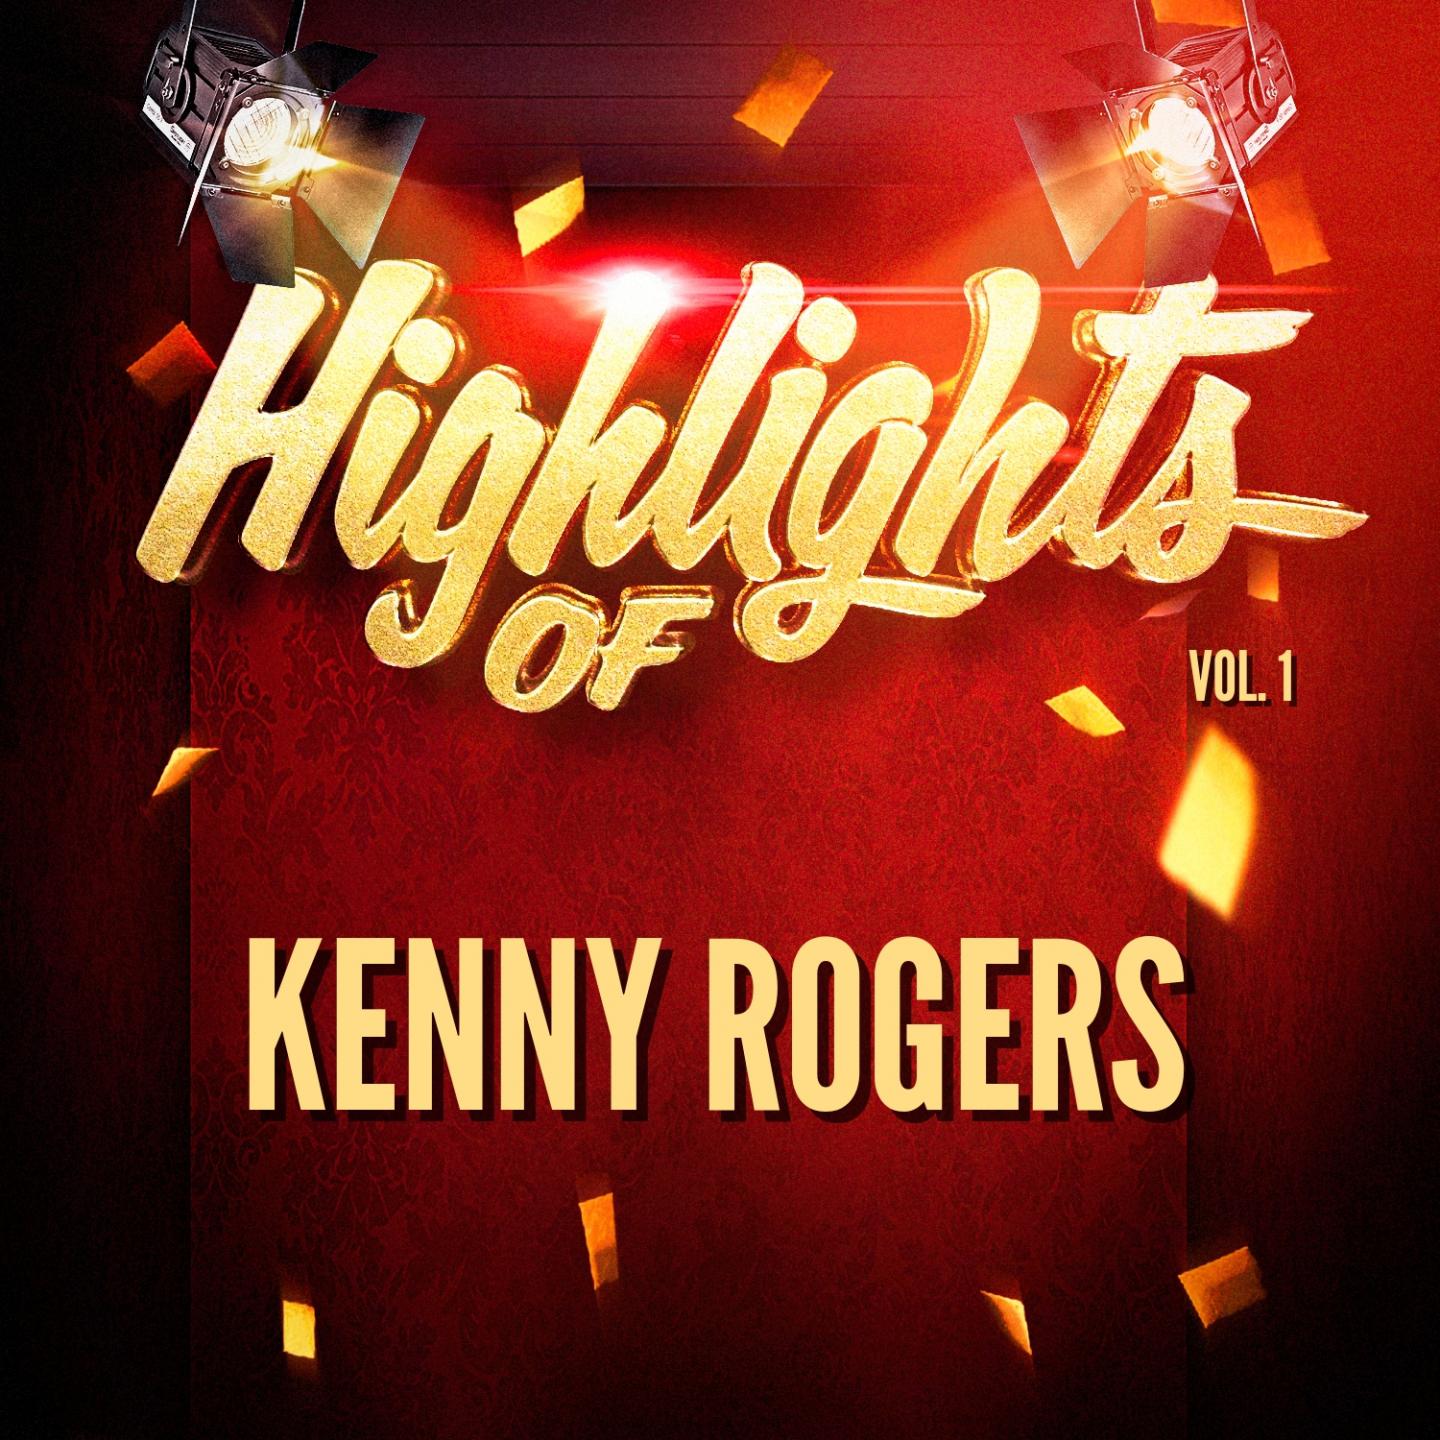 Highlights of Kenny Rogers, Vol. 1